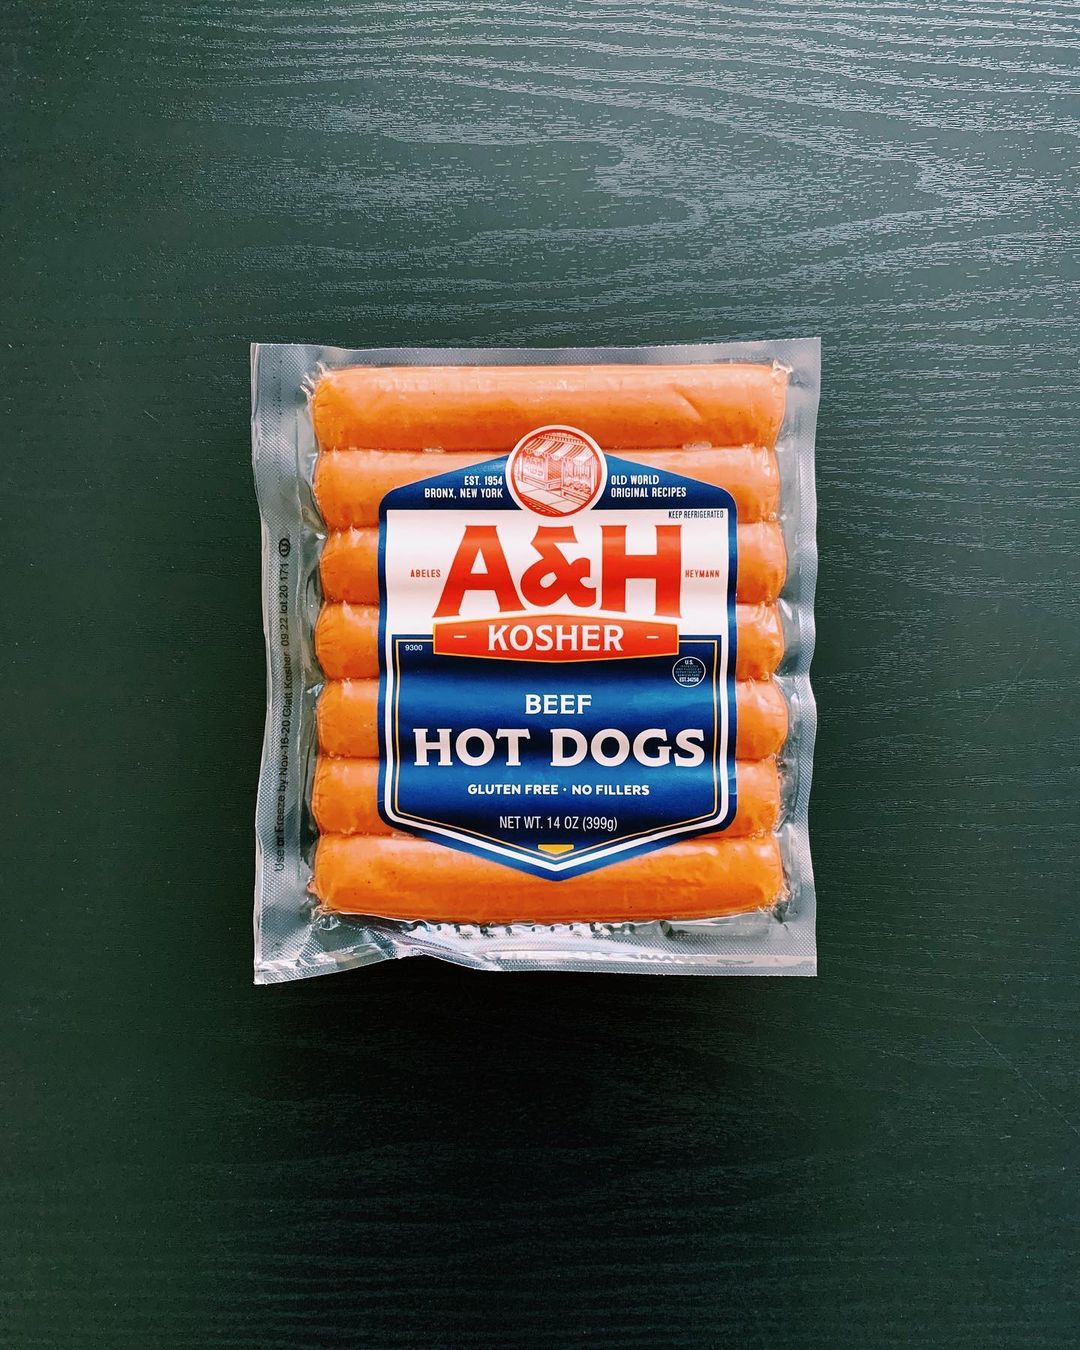 https://traderjoes.reviews/wp-content/uploads/2021/11/AH-Kosher-Hot-Dogs-910-ad-I-am-so.jpg